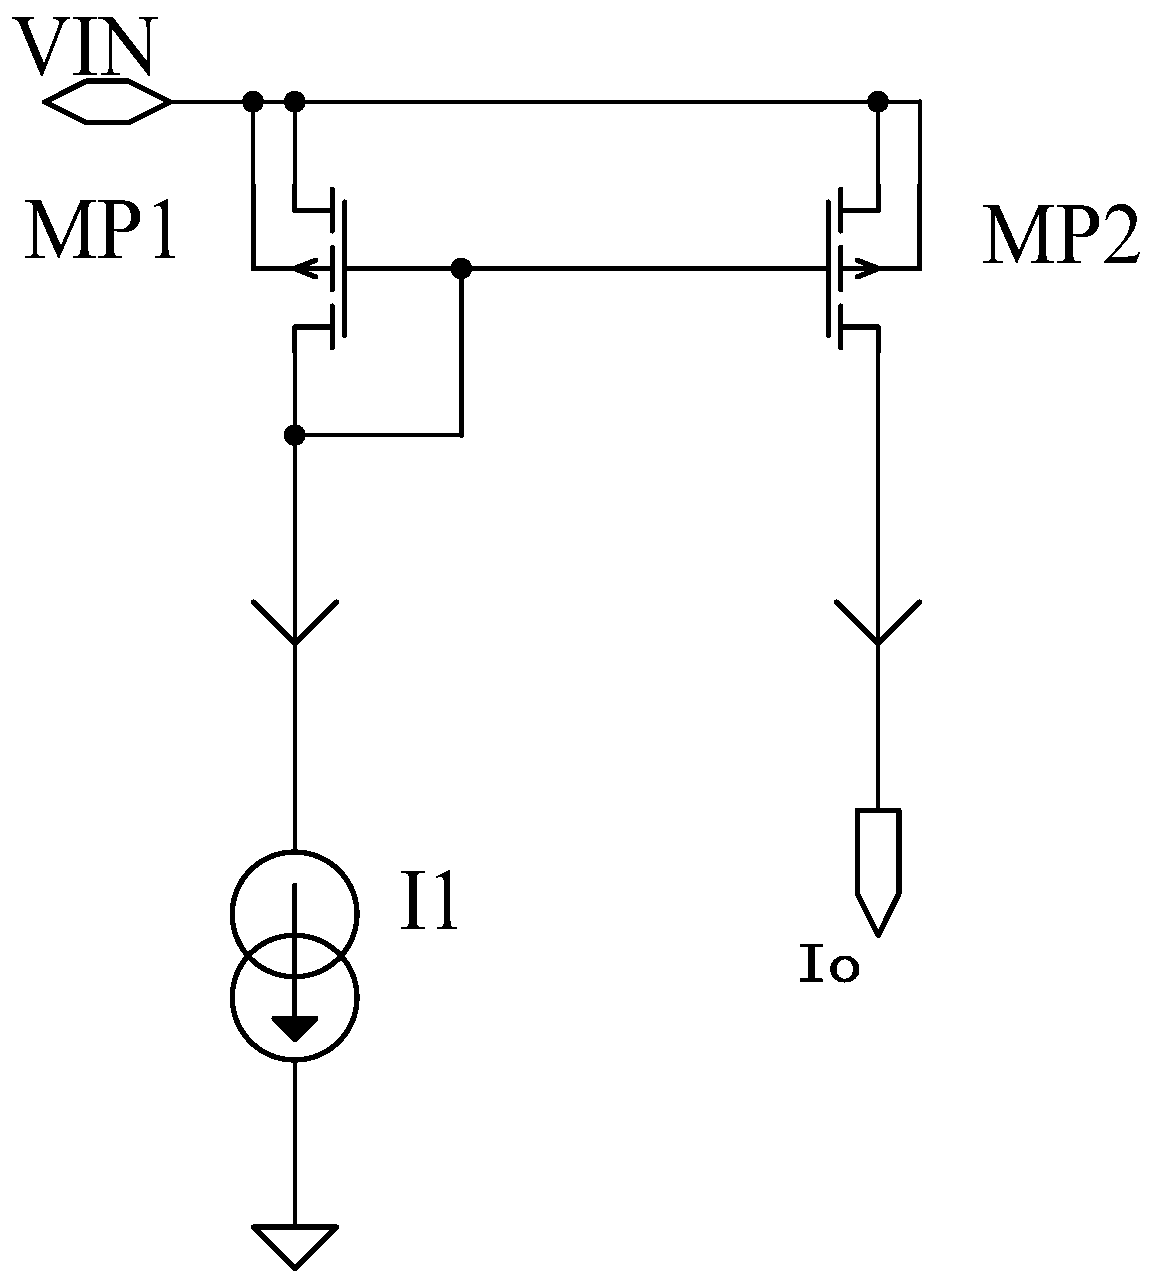 A current mirror circuit provided with a calibration circuit